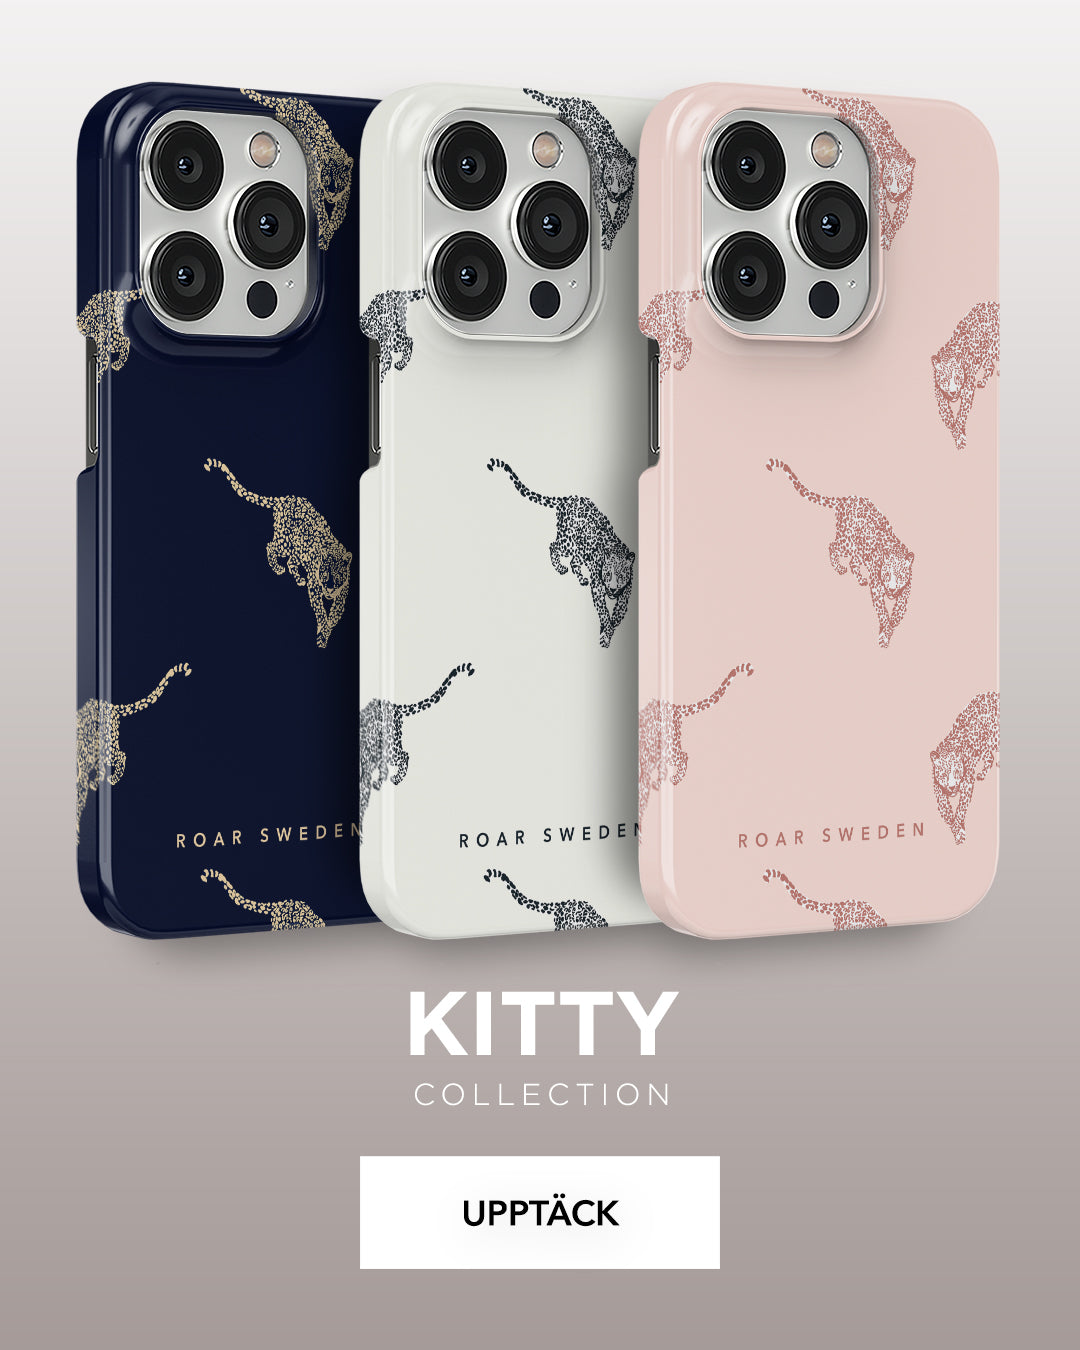 Kitty collection for iphone 11.